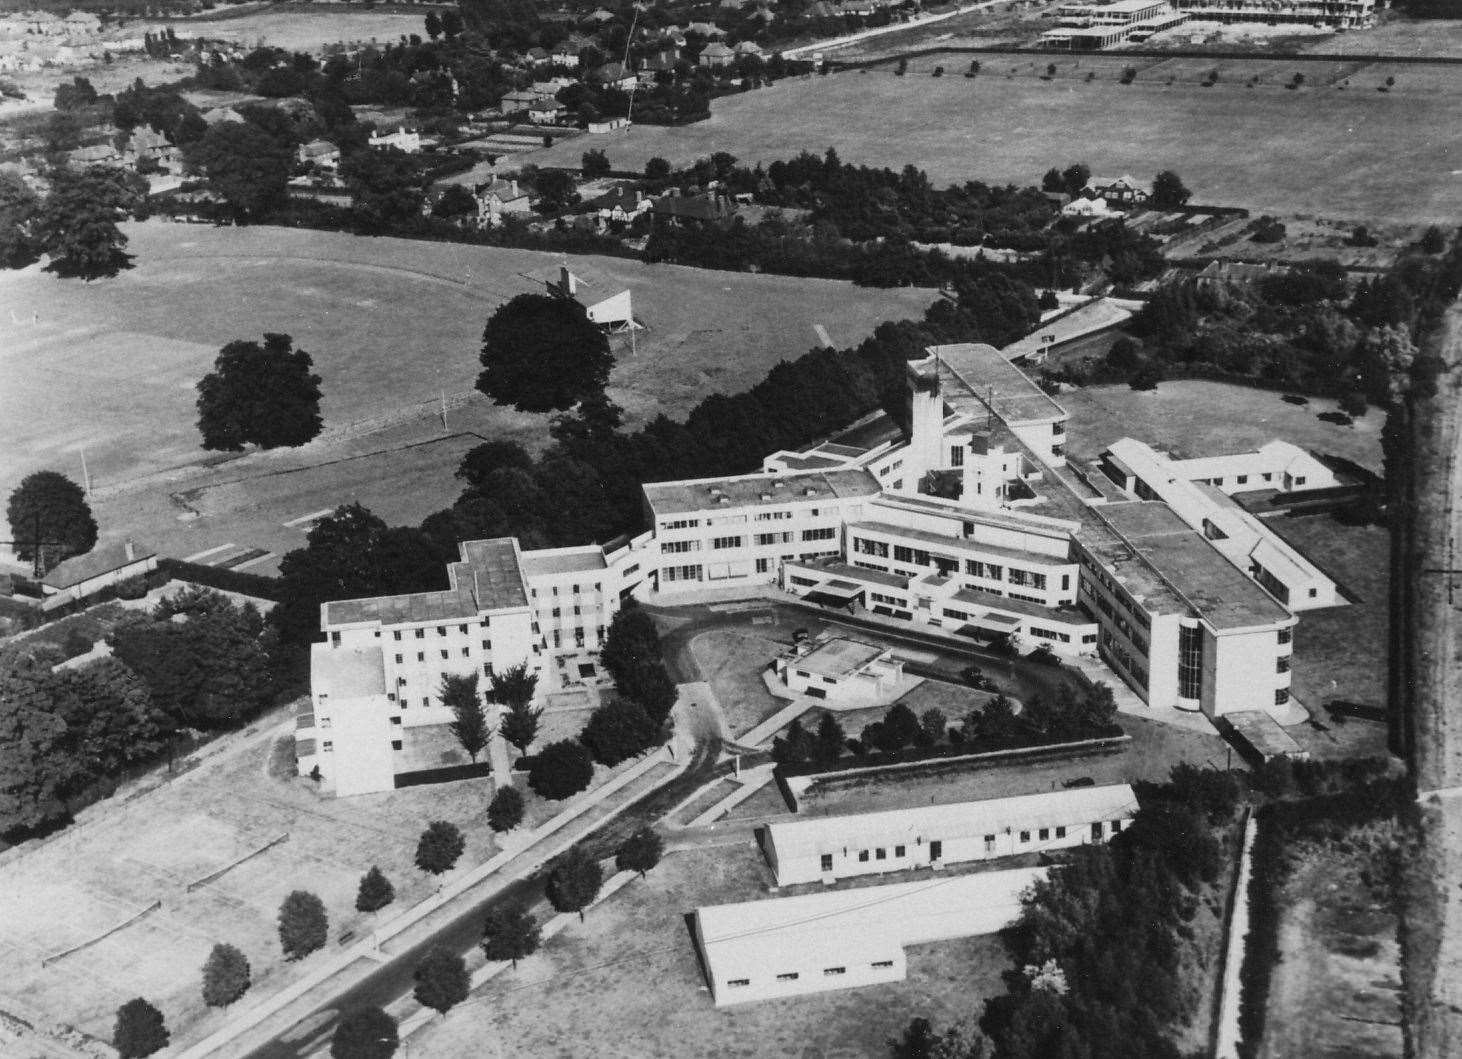 An aerial view of the Kent and Canterbury Hospital, taken in 1947